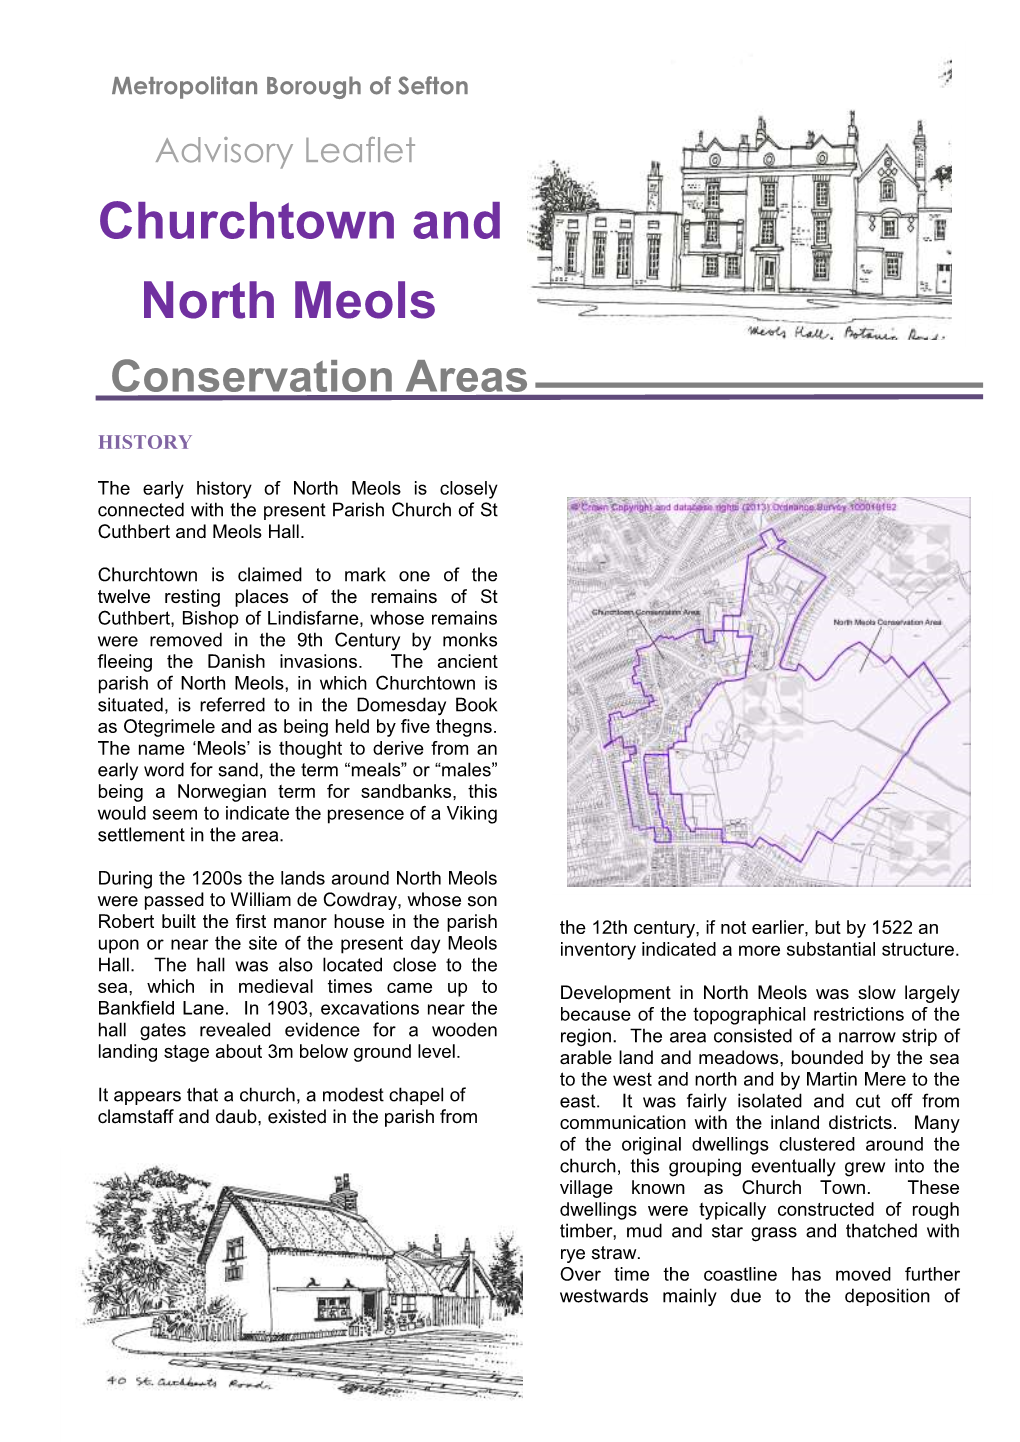 Churchtown and North Meols Conservation Area